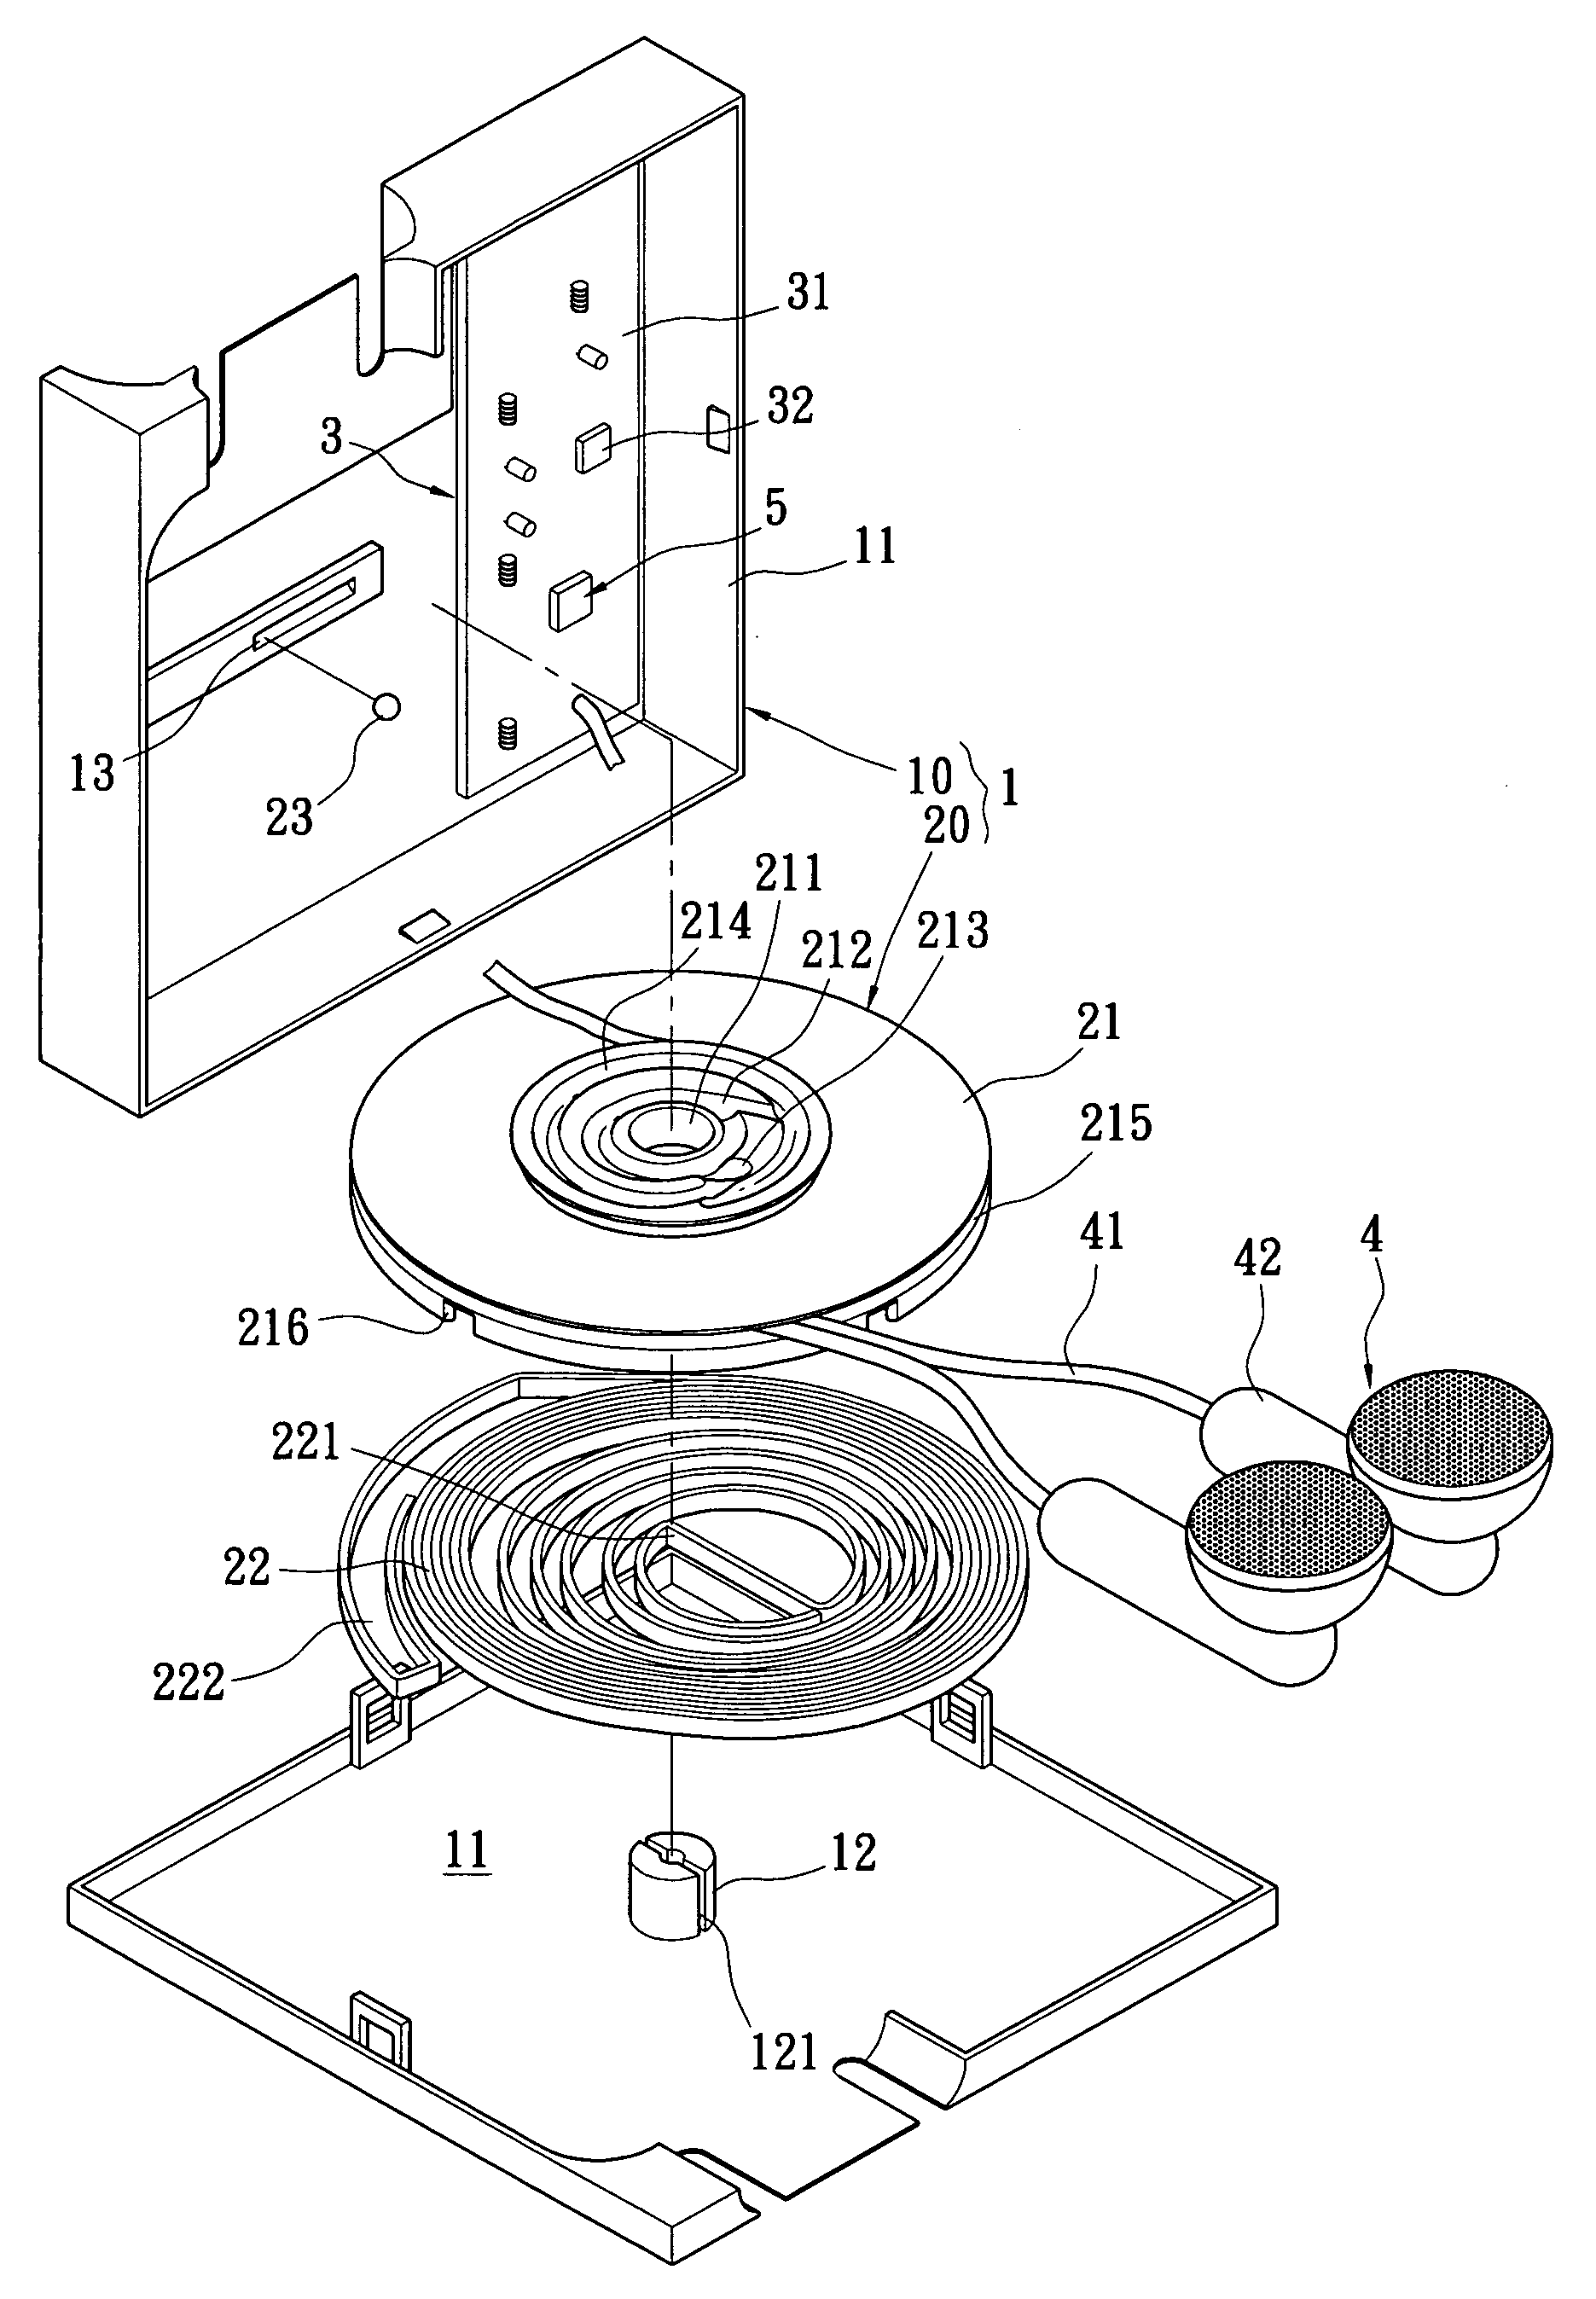 Reel device with music play function